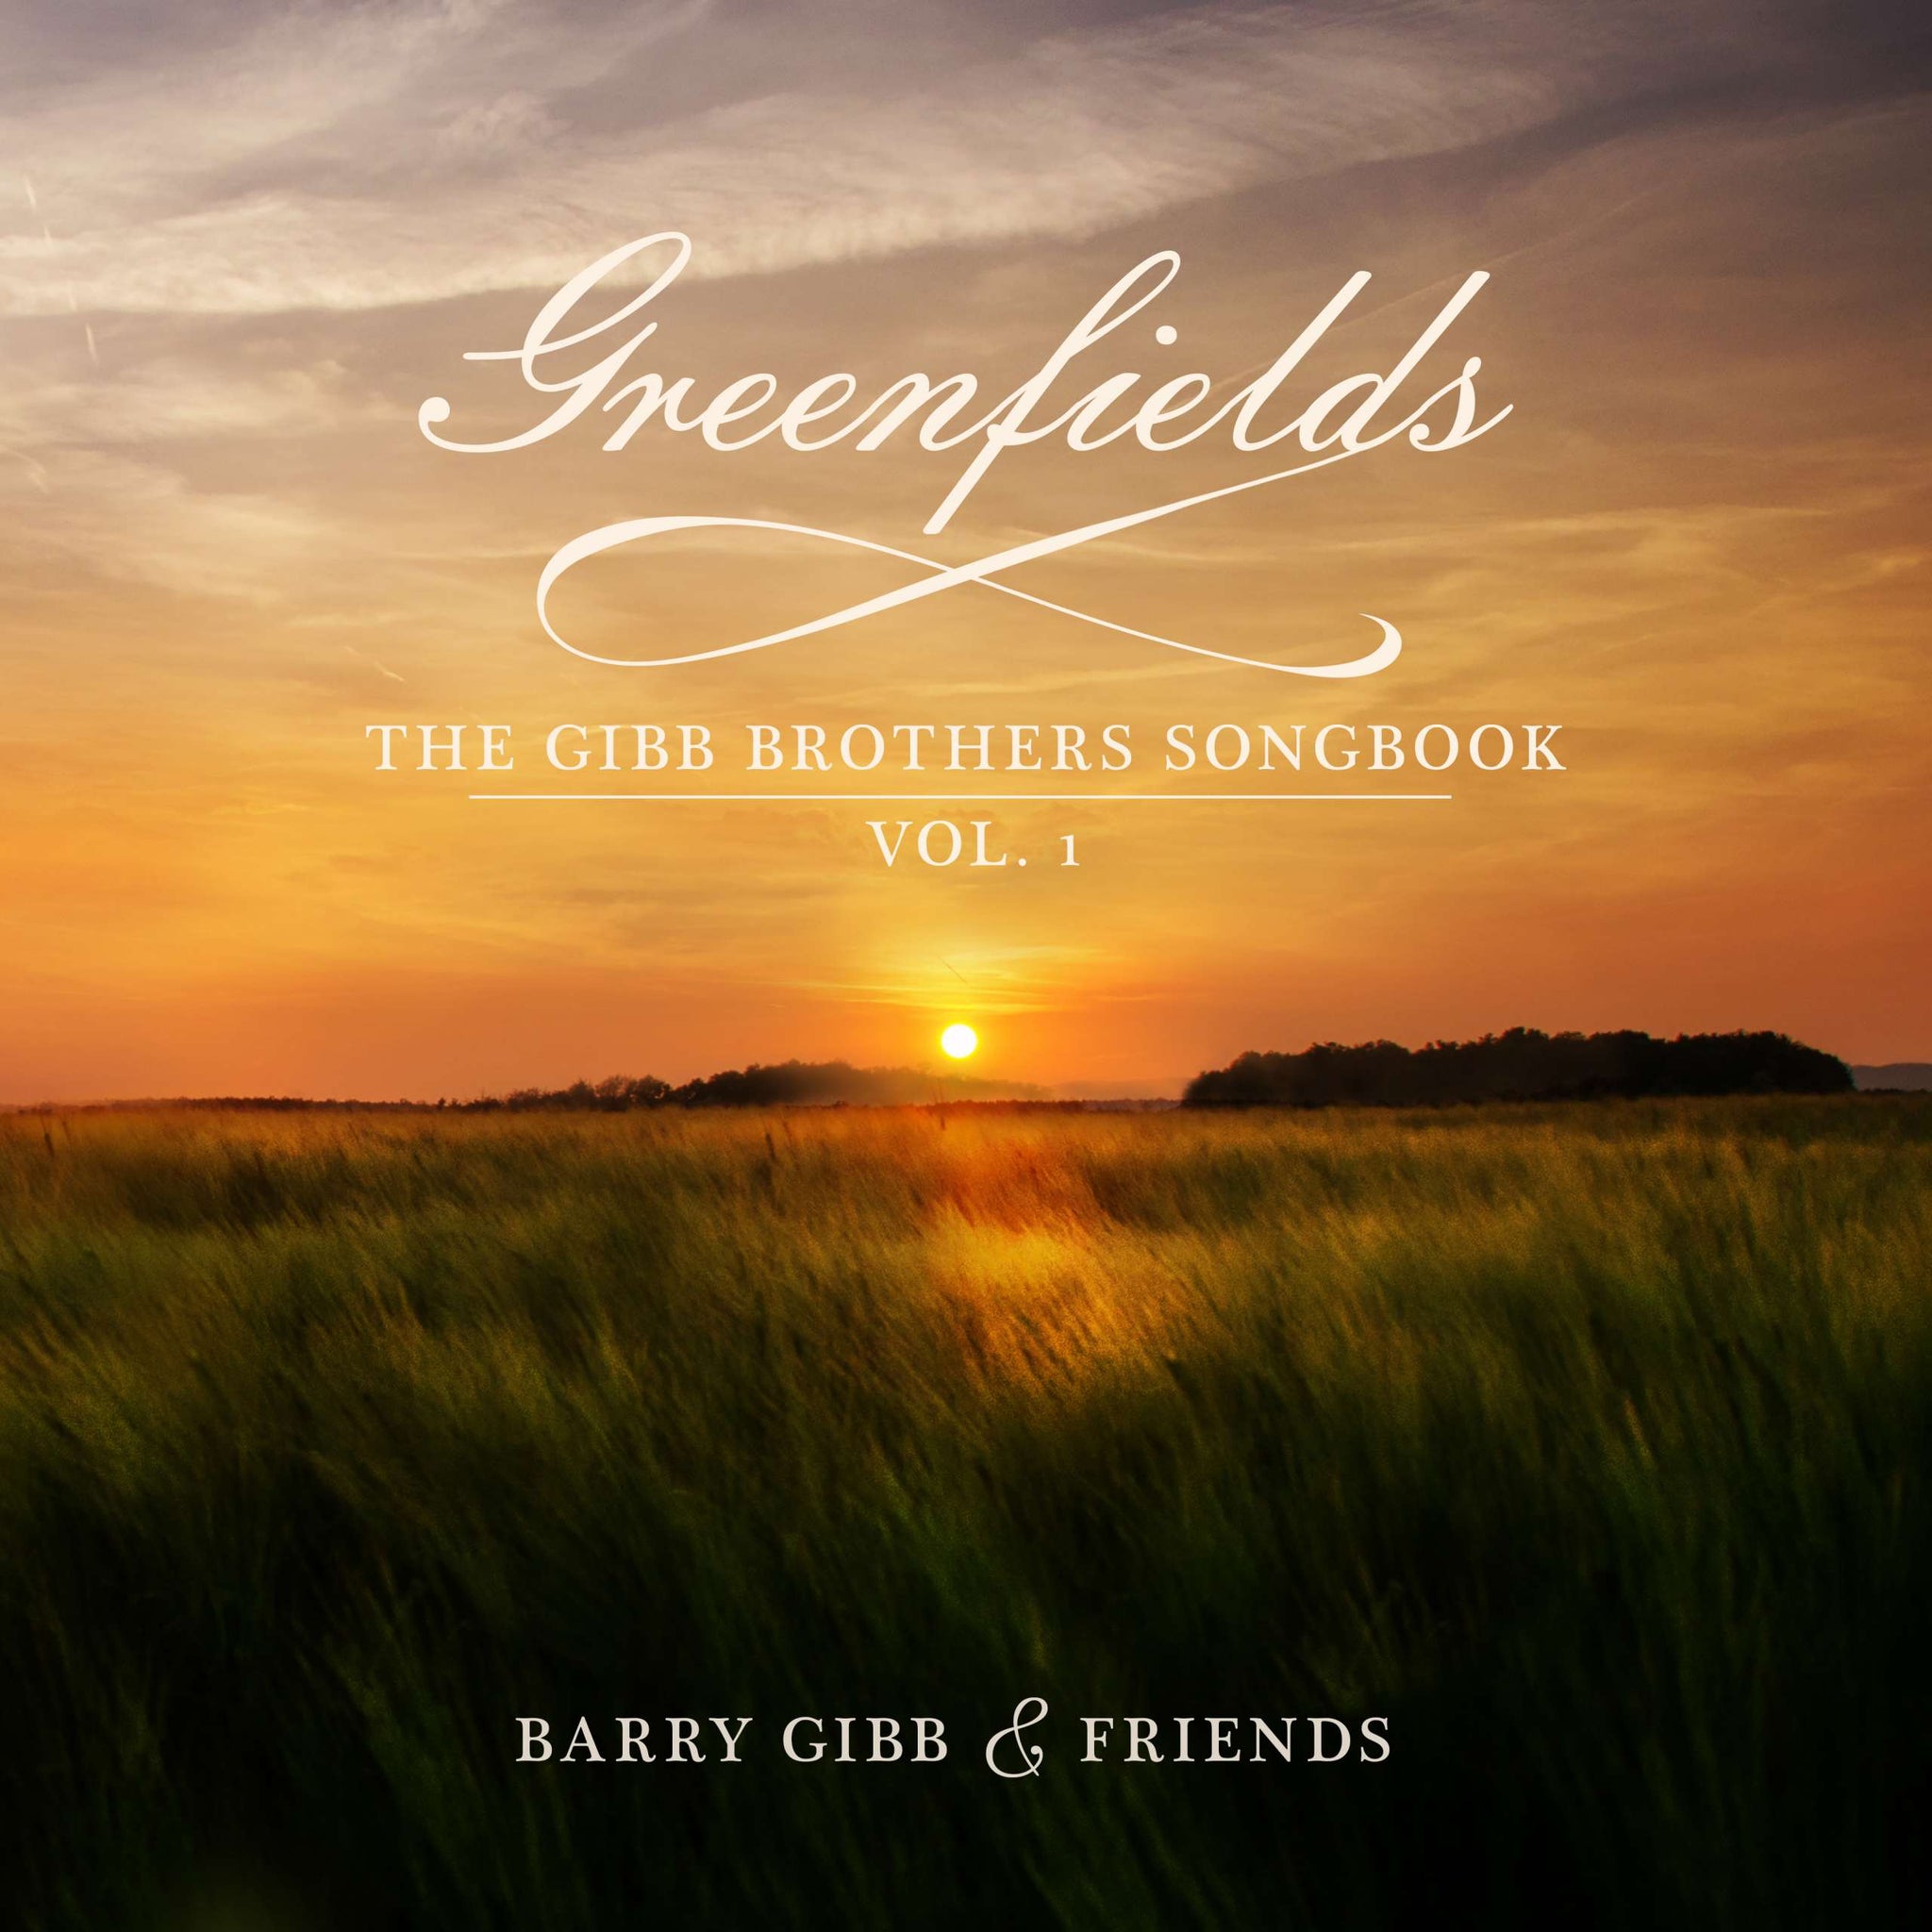 BARRY GIBB & FRIENDS - Greenfields: The Gibb Brothers' Songbook - CD